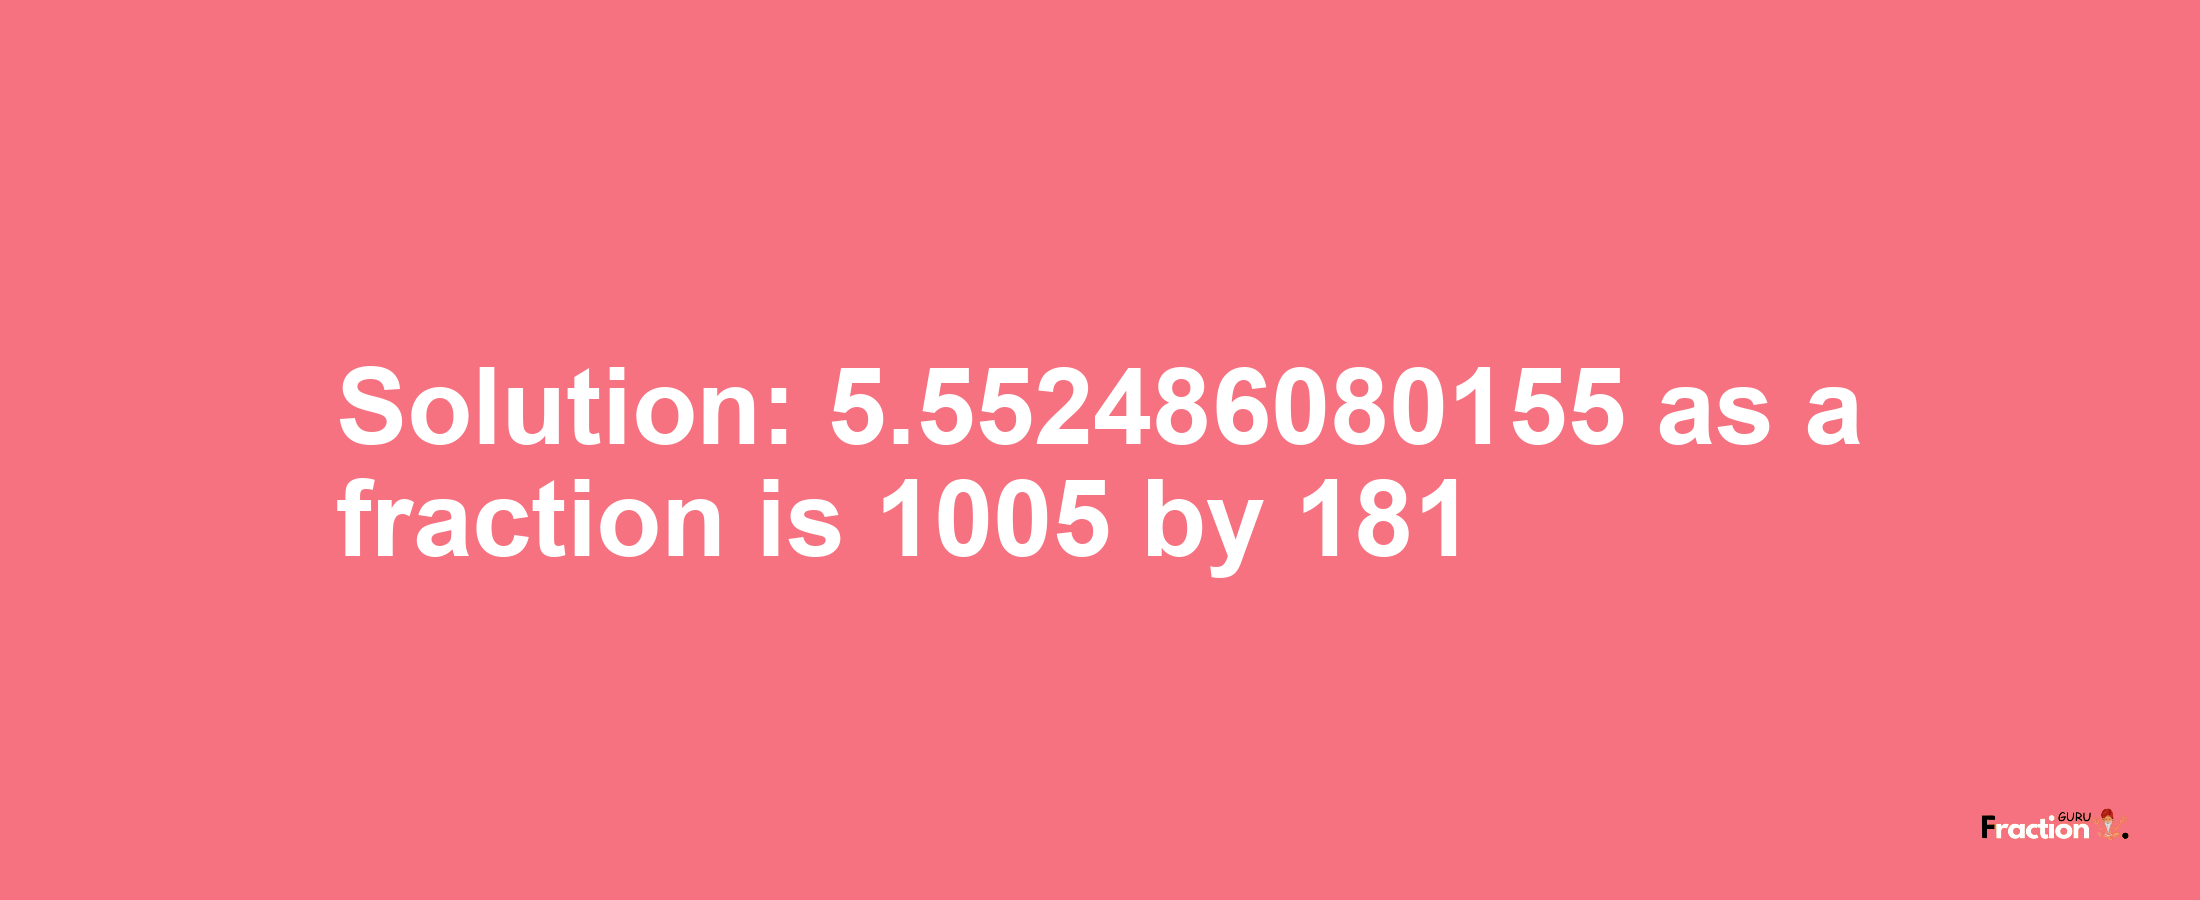 Solution:5.552486080155 as a fraction is 1005/181